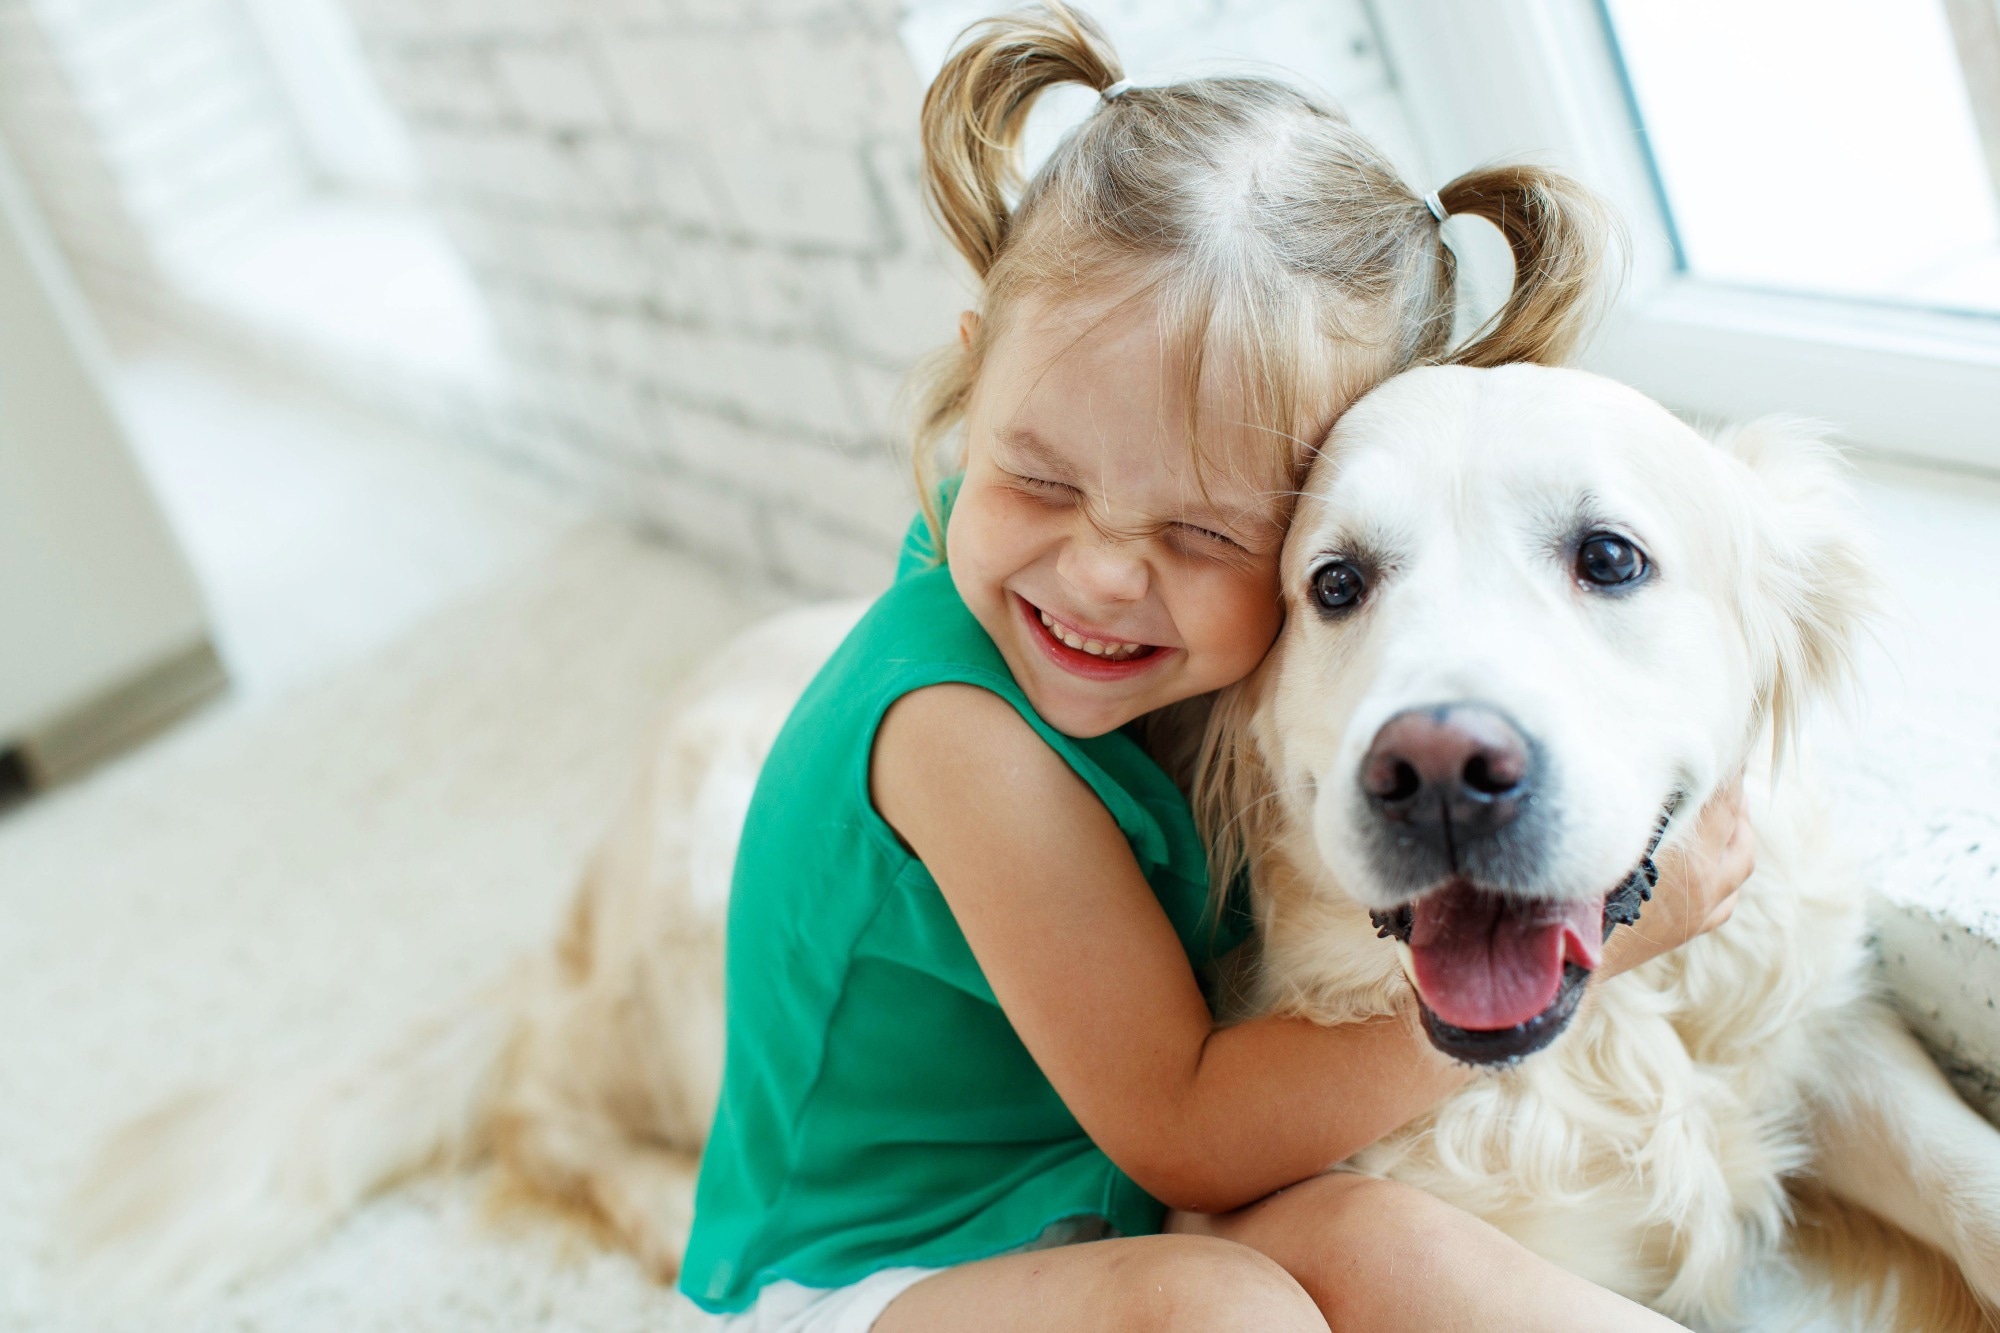 Study: Dog ownership in infancy is protective for persistent wheeze in 17q21 asthma-risk carriers. Image Credit: Nina Buday/Shutterstock